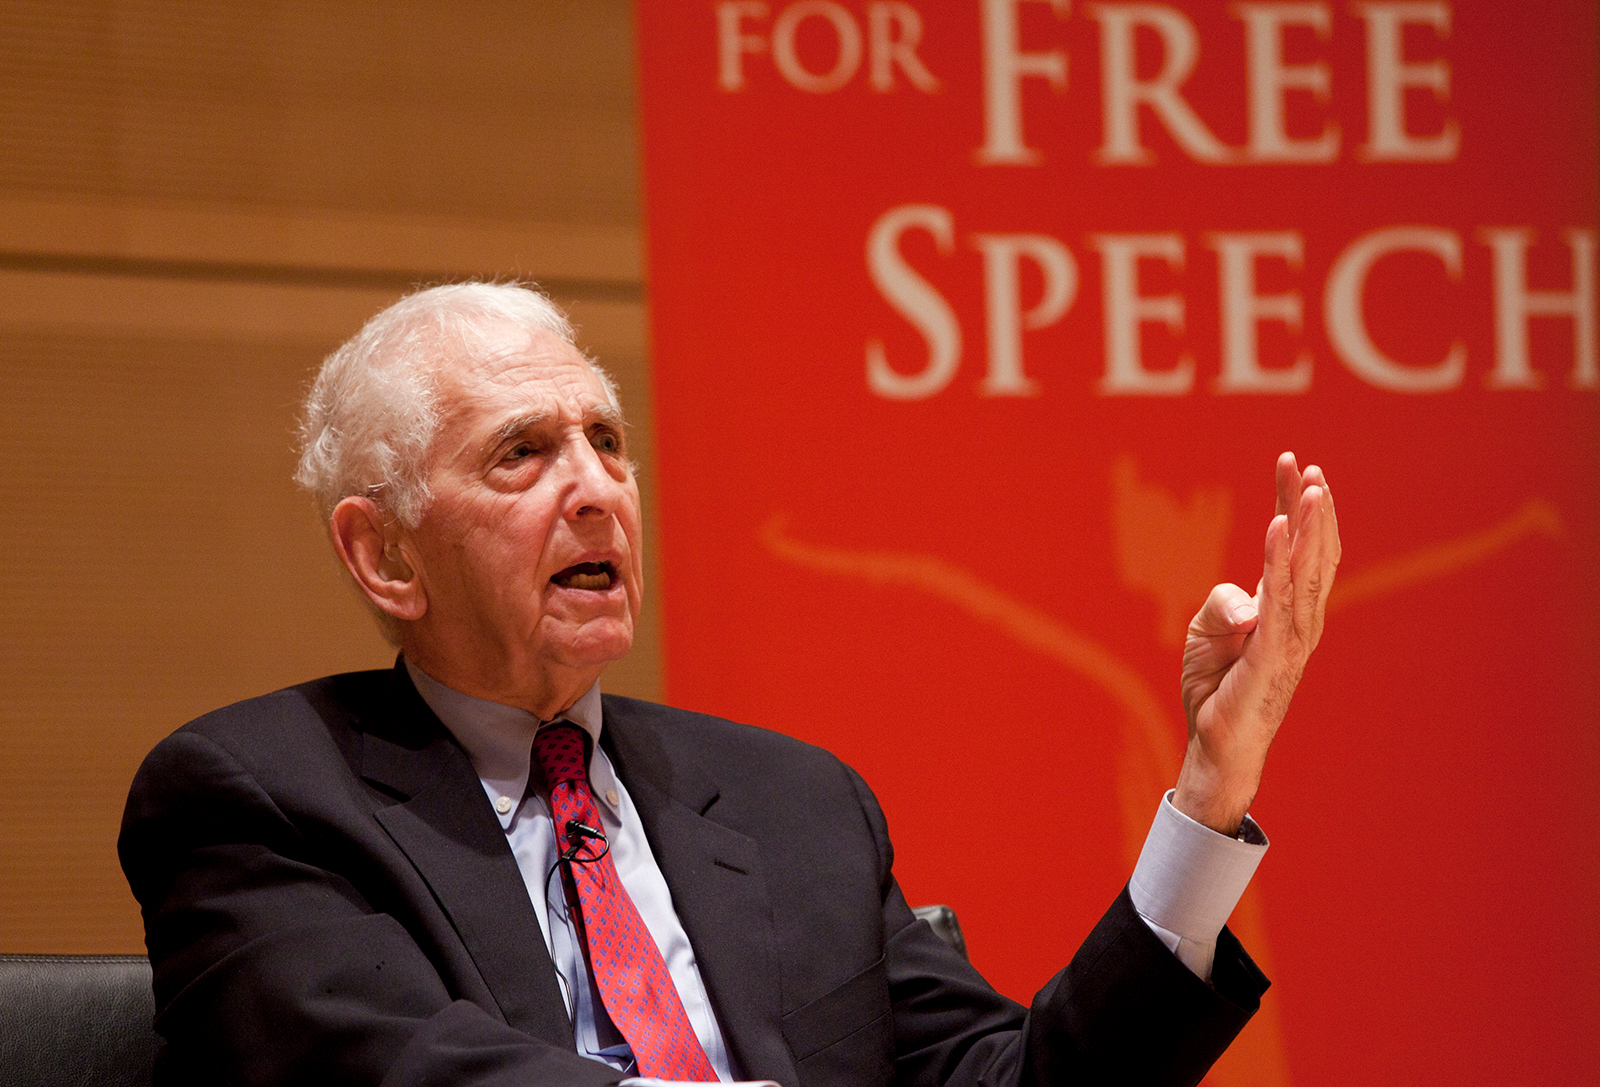 A man gestures while speaking during a lecture